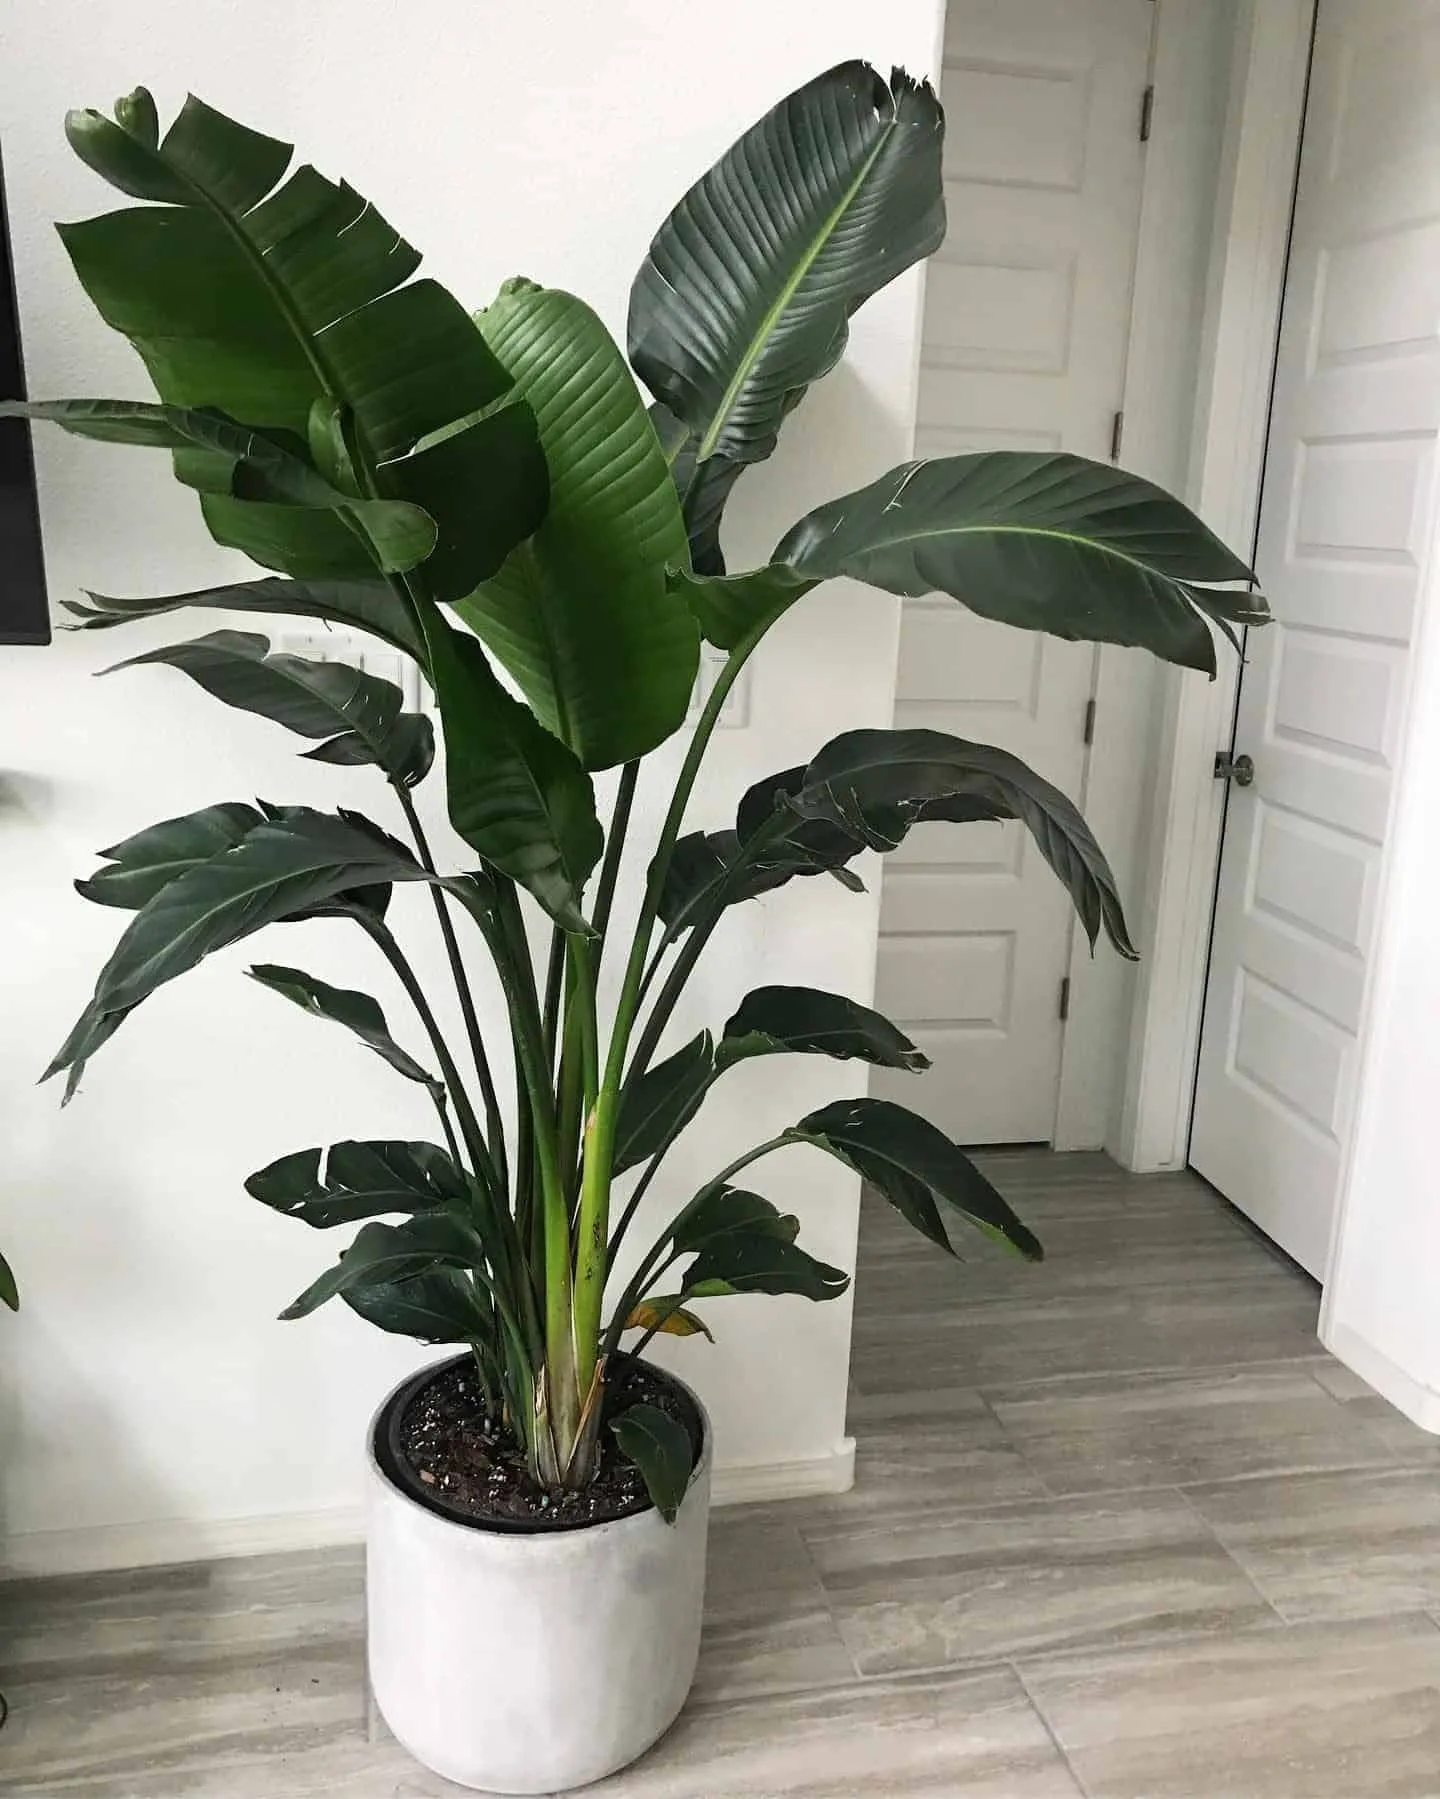 dark green leaves of banana plant in white pot in the corner of a room with white walls